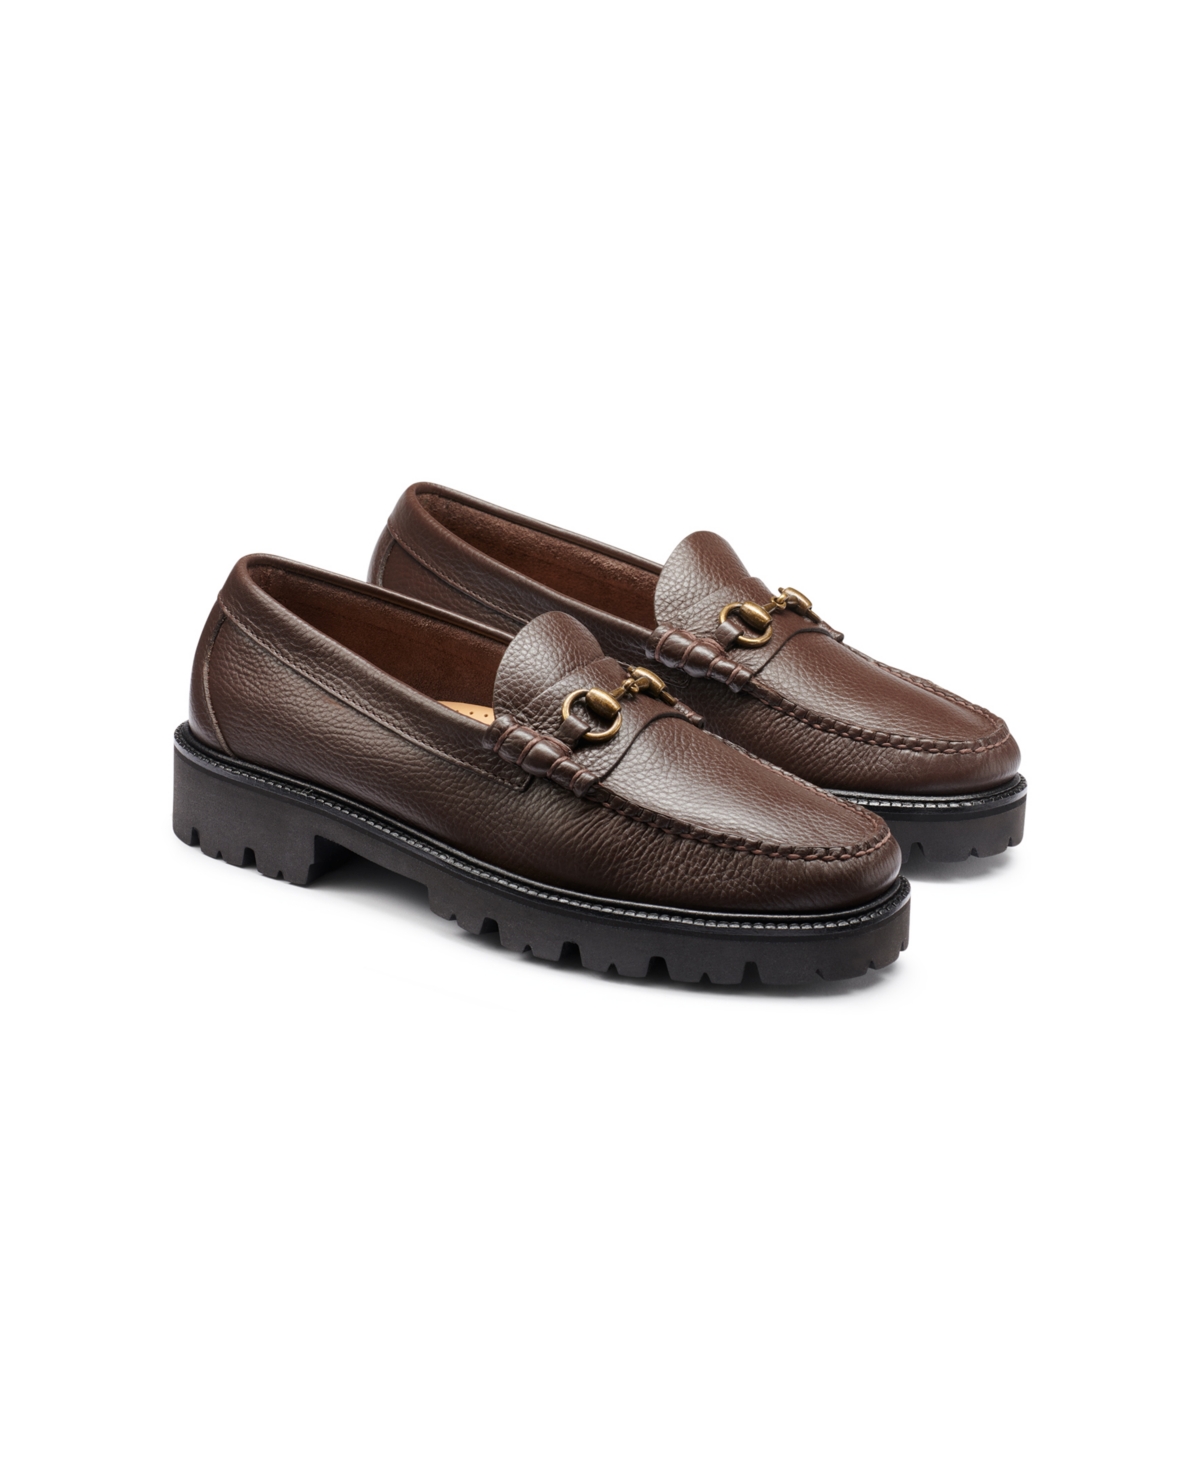 Gh Bass G.h.bass Men's Lincoln Bit Lug Weejuns Slip On Loafers In Brown